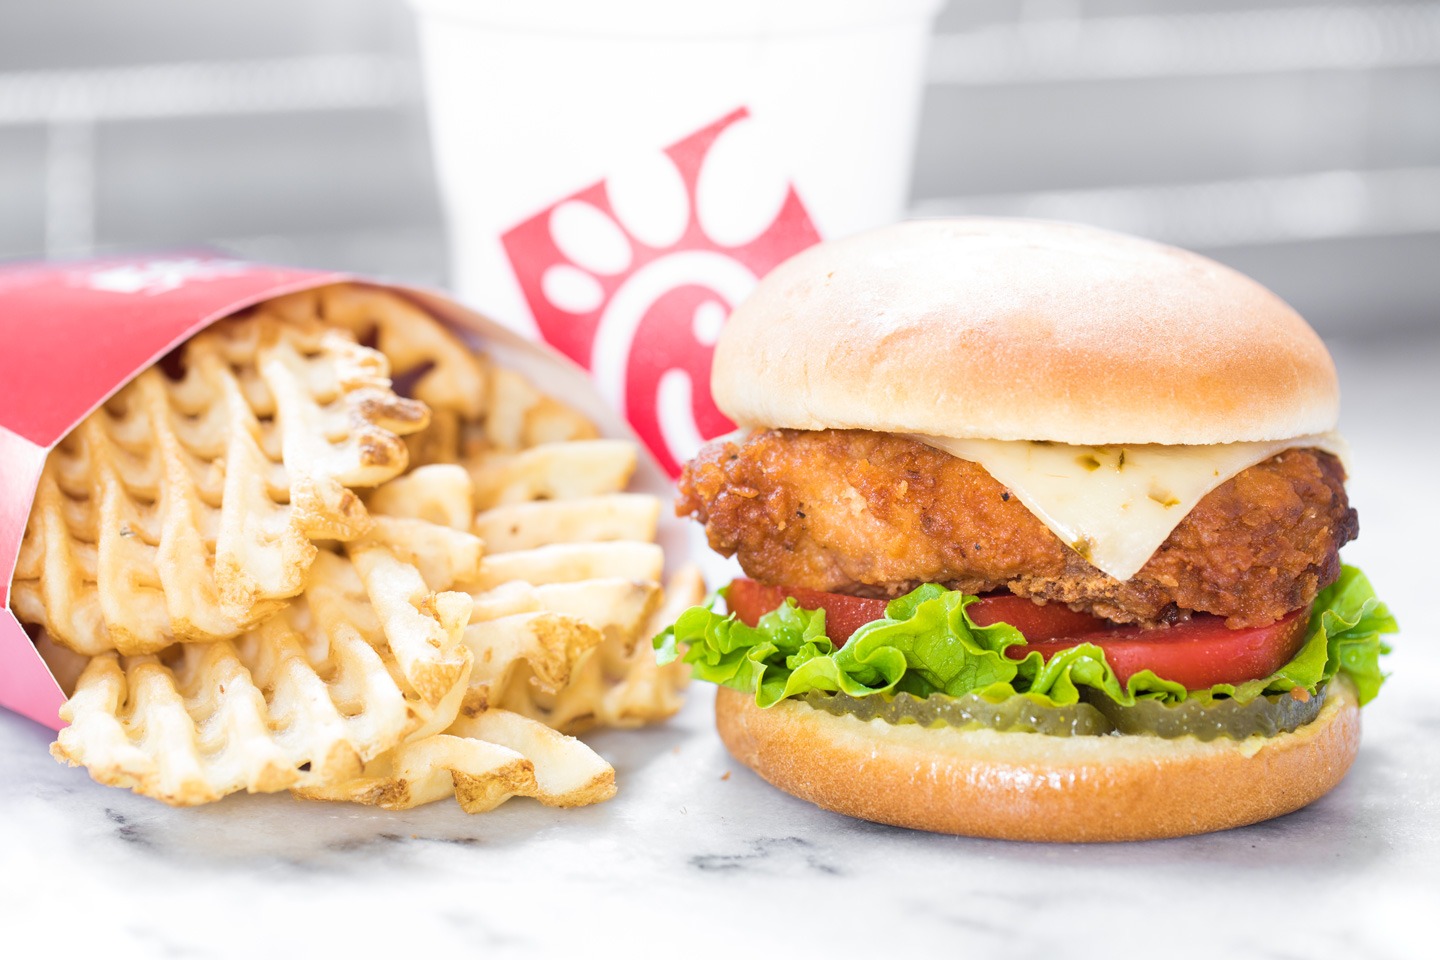 Chick-fil-a to set up shop in Tigard.